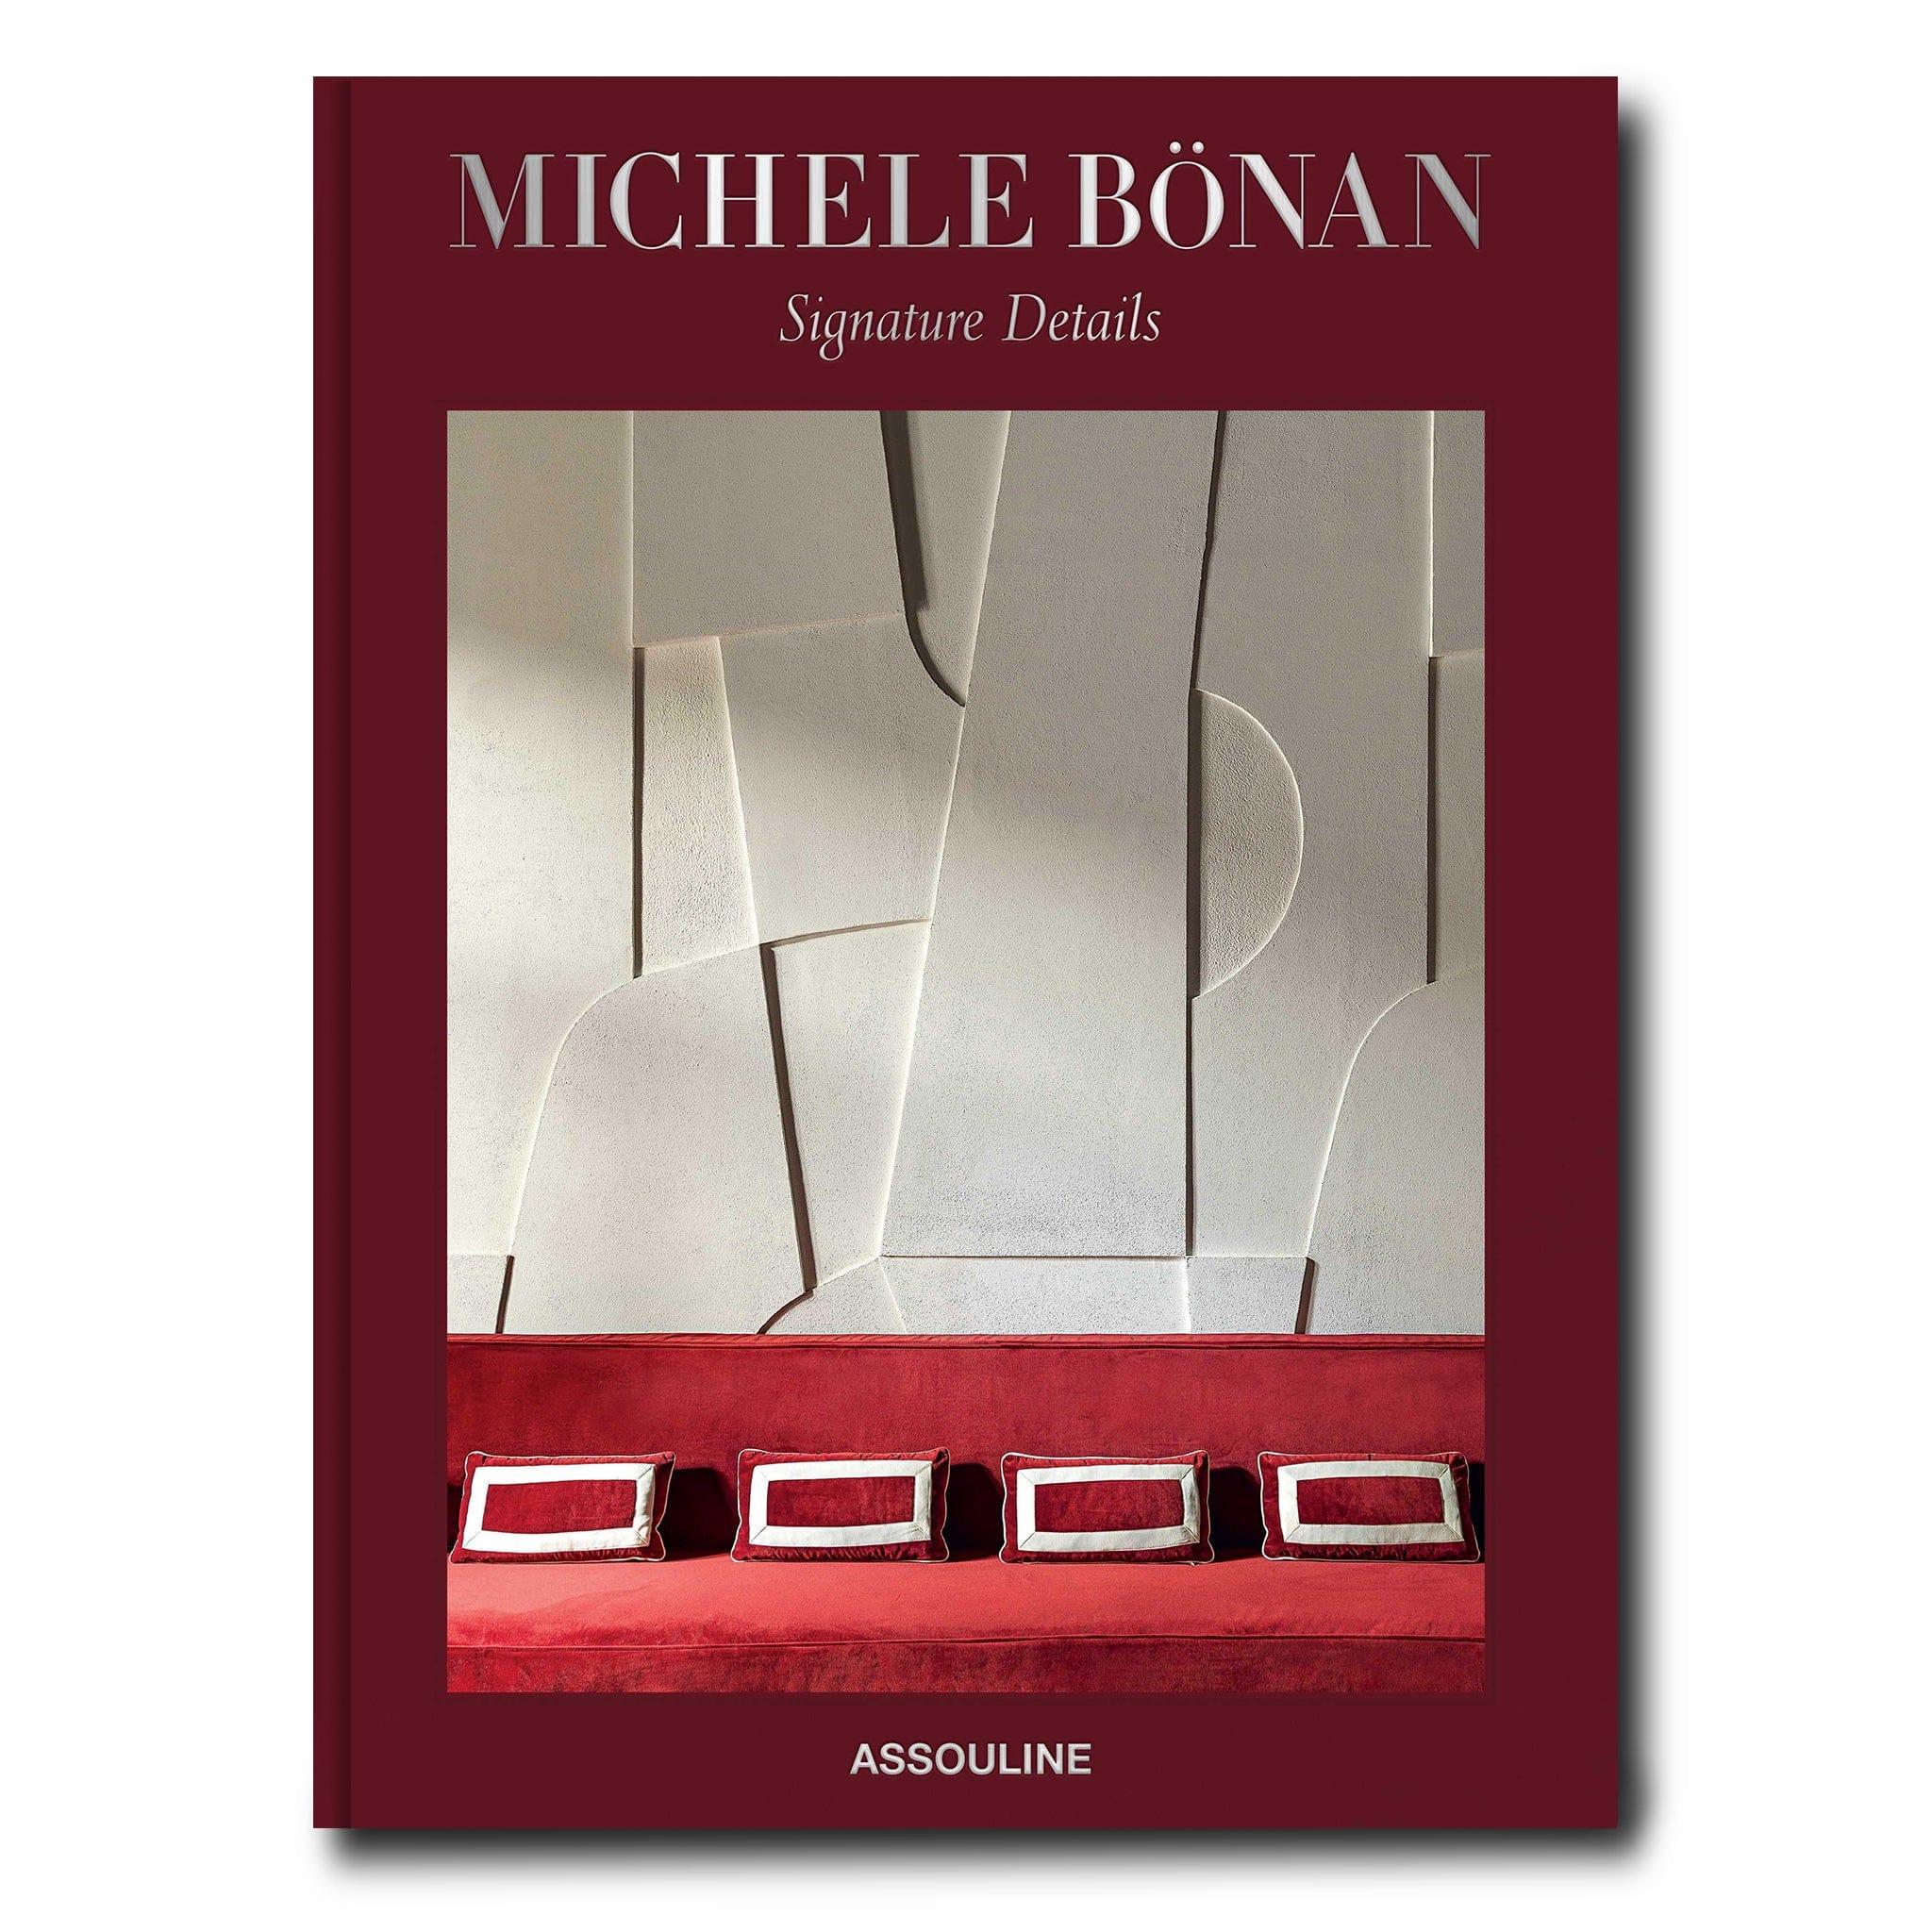 An architect and interior designer, Michele Bönan translates and transmits the Italian lifestyle in a very specific way, with strong cosmopolitan connotations. His ability to create refined, timeless environments using exquisite materials—always